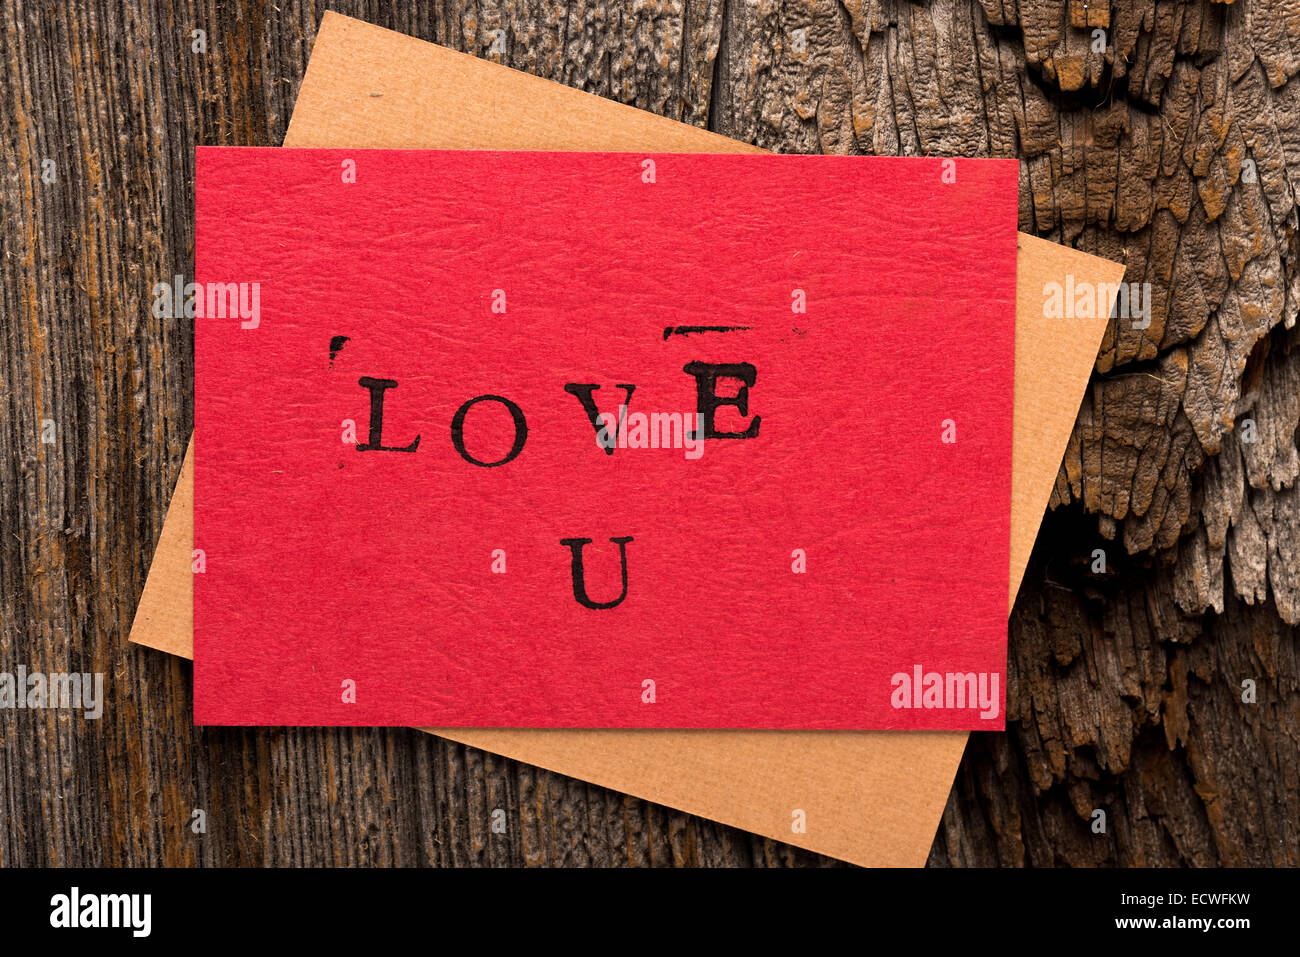 Handmade stamped valentine's day card with Love U stamped on it set on rustic wood with copy space Stock Photo